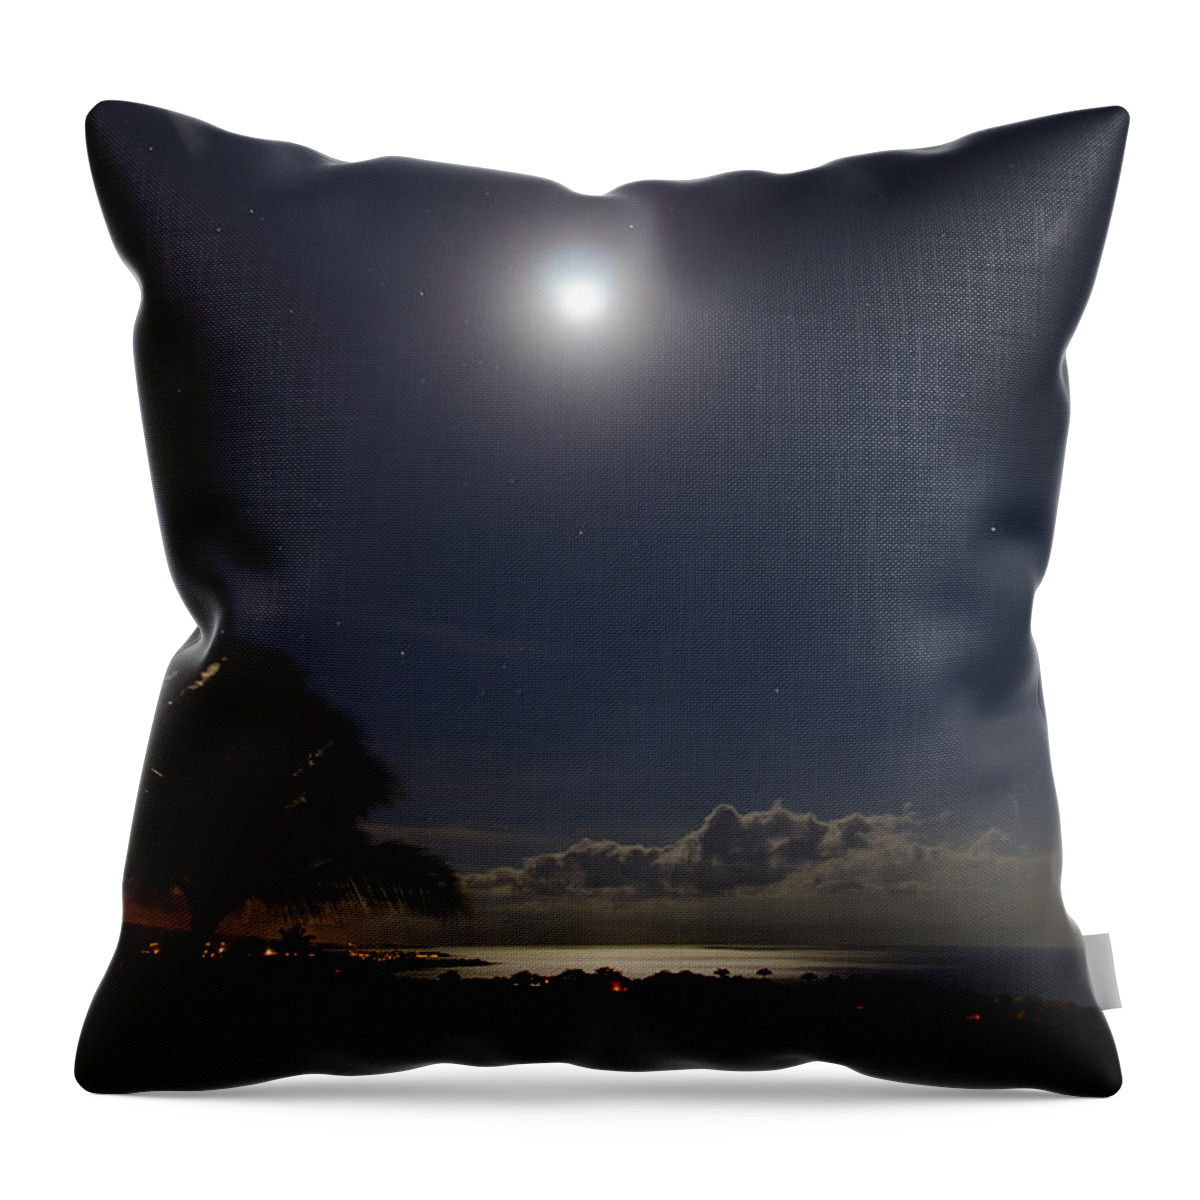 Moon Throw Pillow featuring the photograph Moonlit Bay by Daniel Murphy